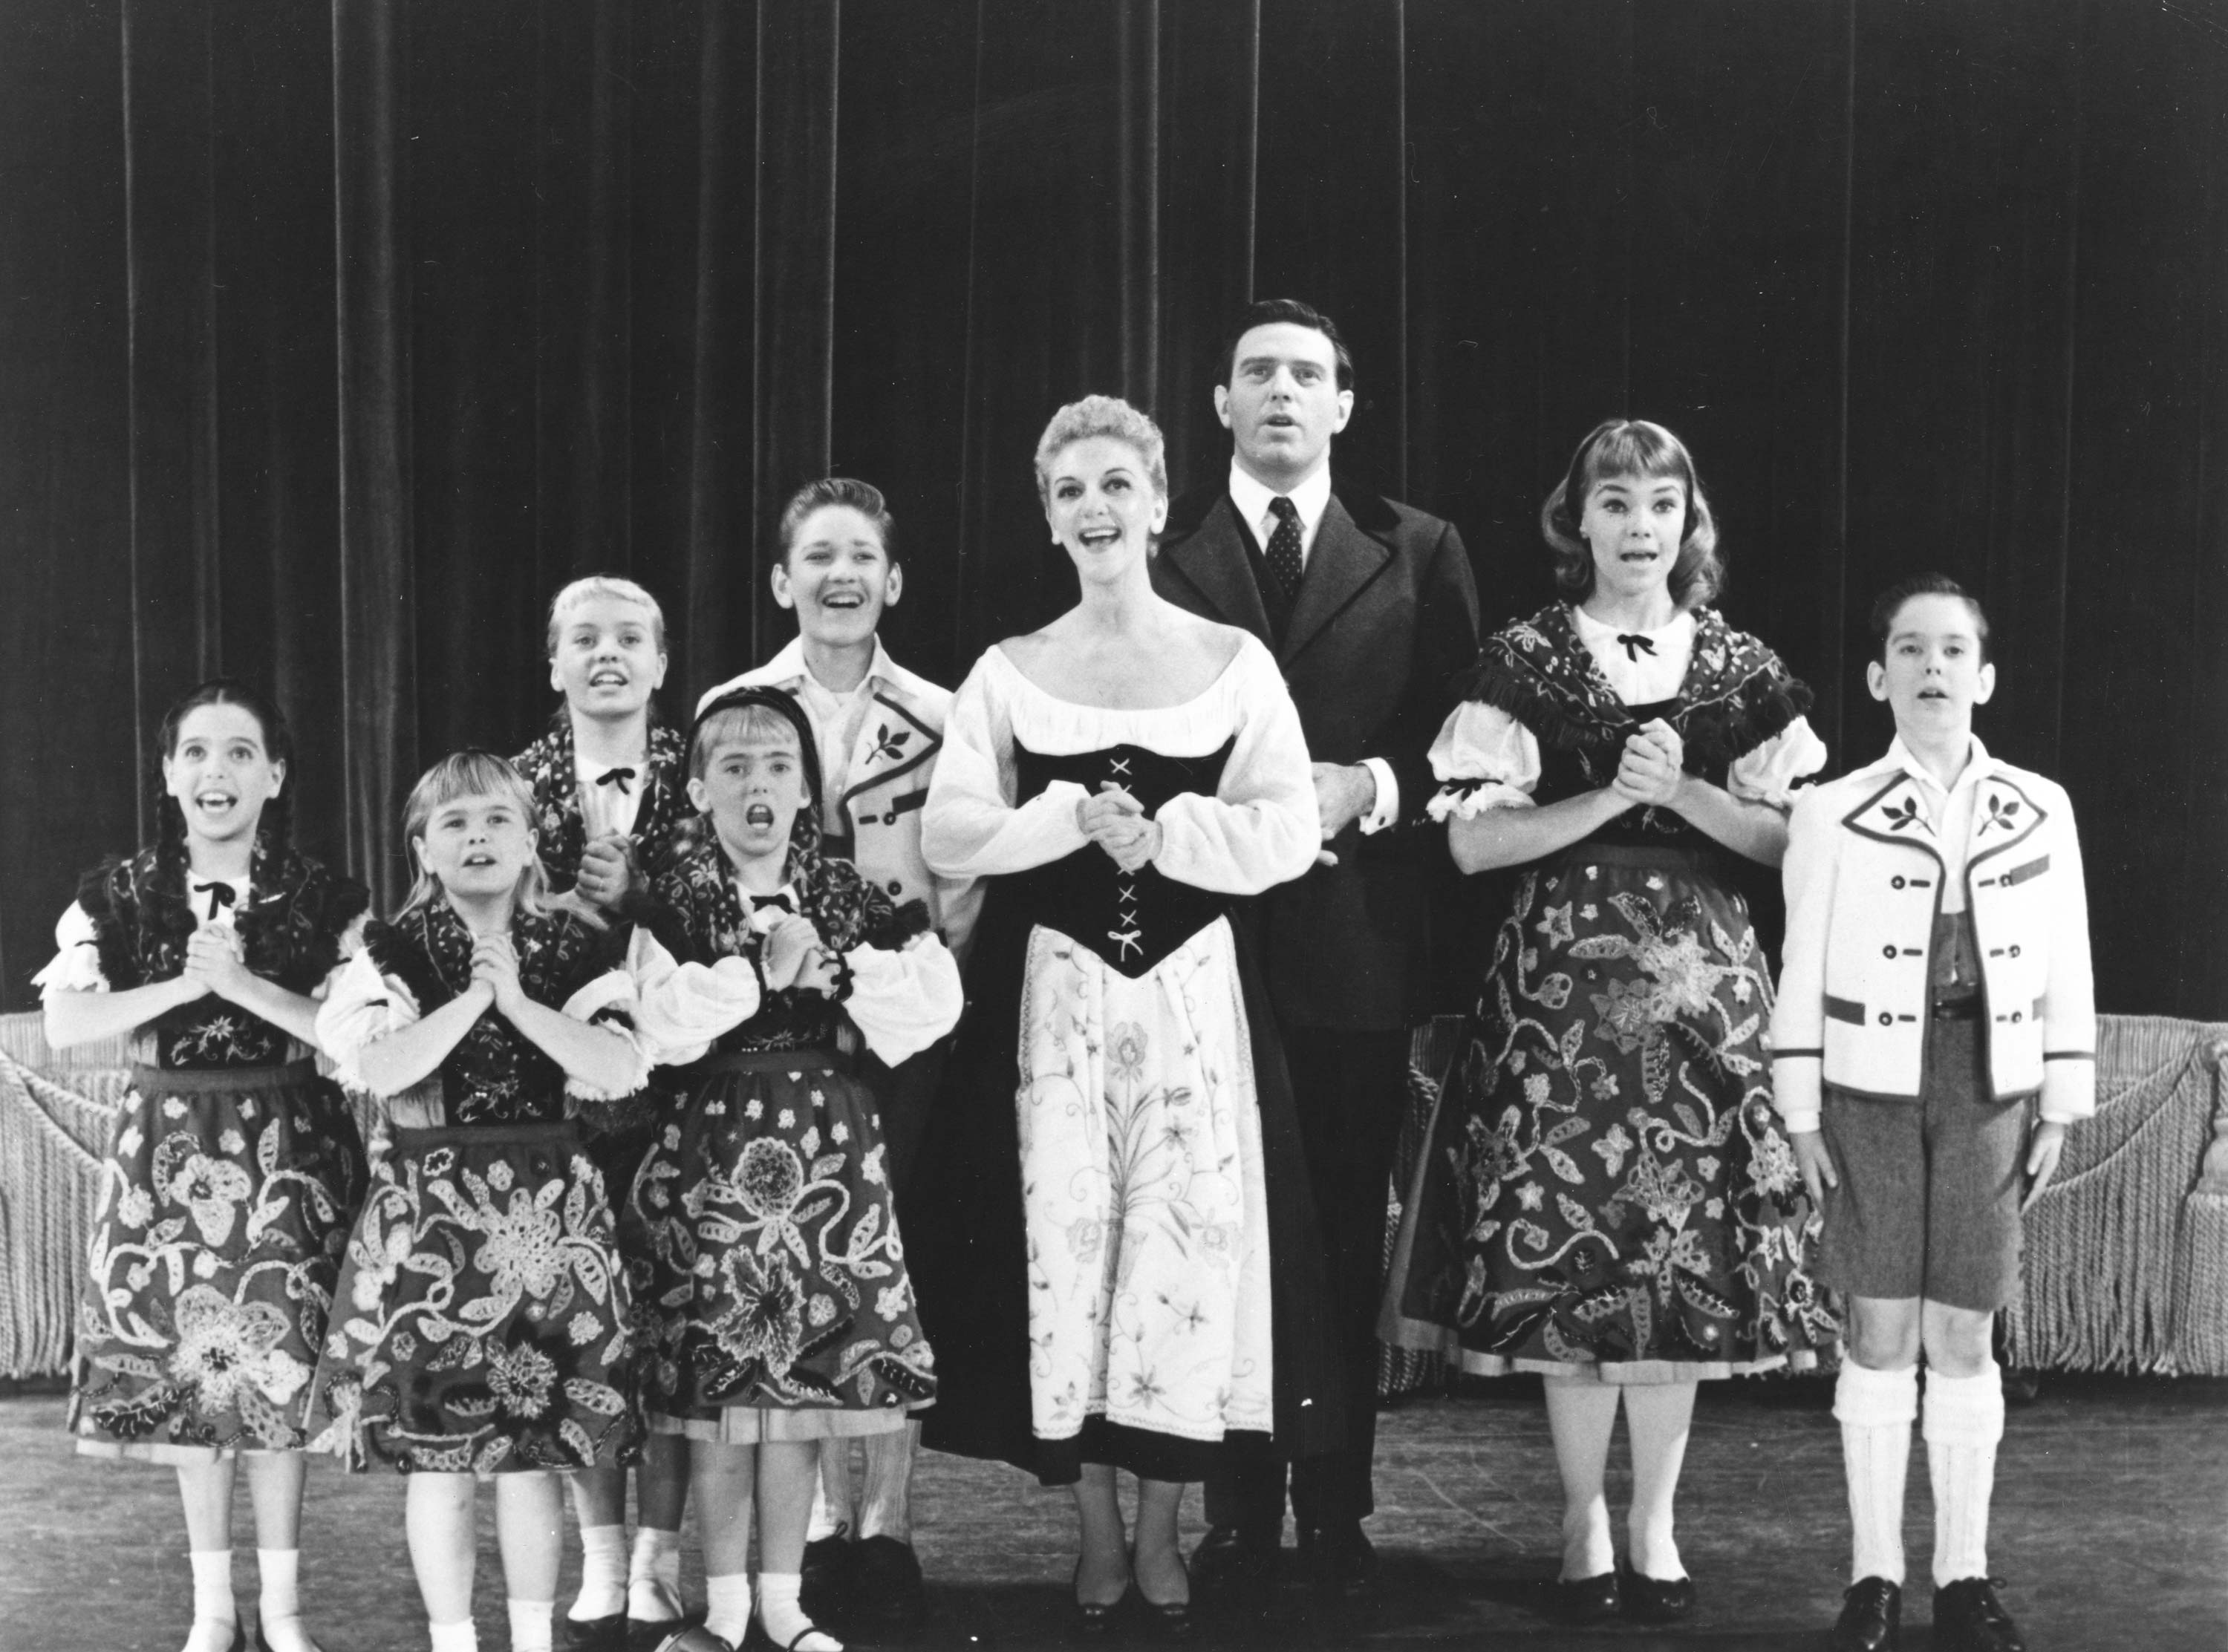 A photo from the 1959 Broadway production of The Sound of Music.